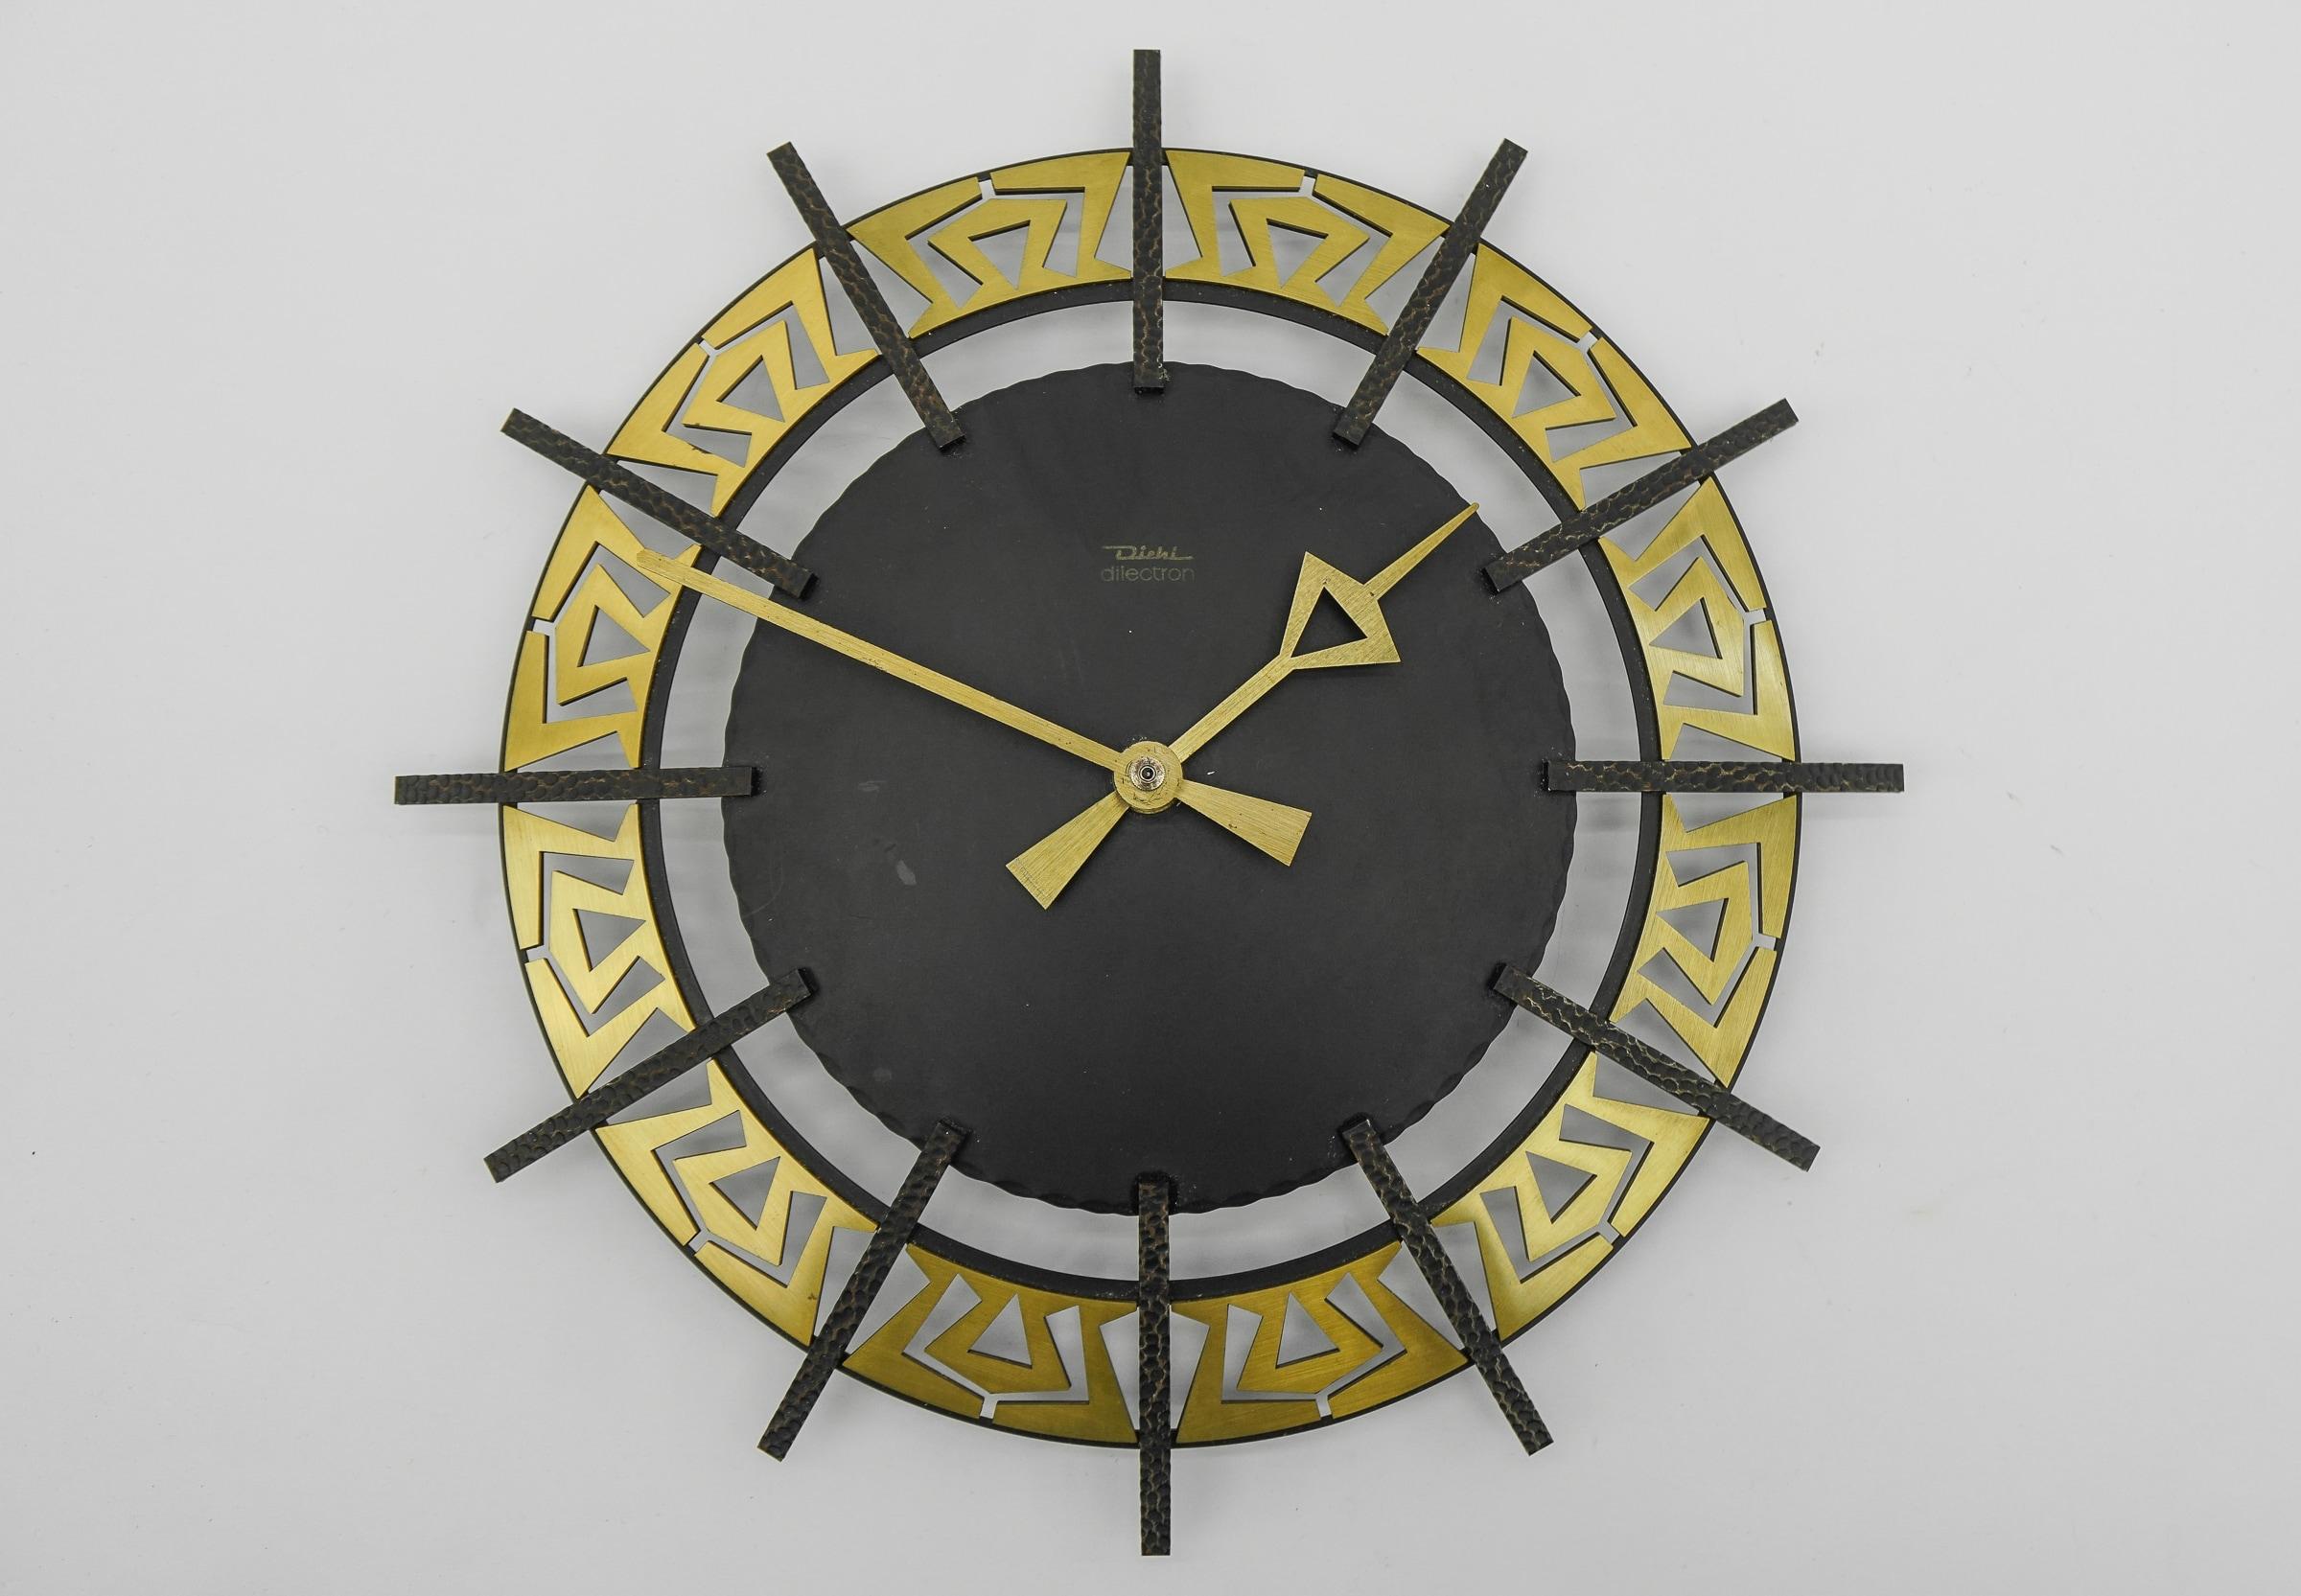 Stunning wall clock made of Iron & brass. 

An eye catcher par excellence.

Made in Germany.

We have tested it and it works.

Electric, battery operated clock.